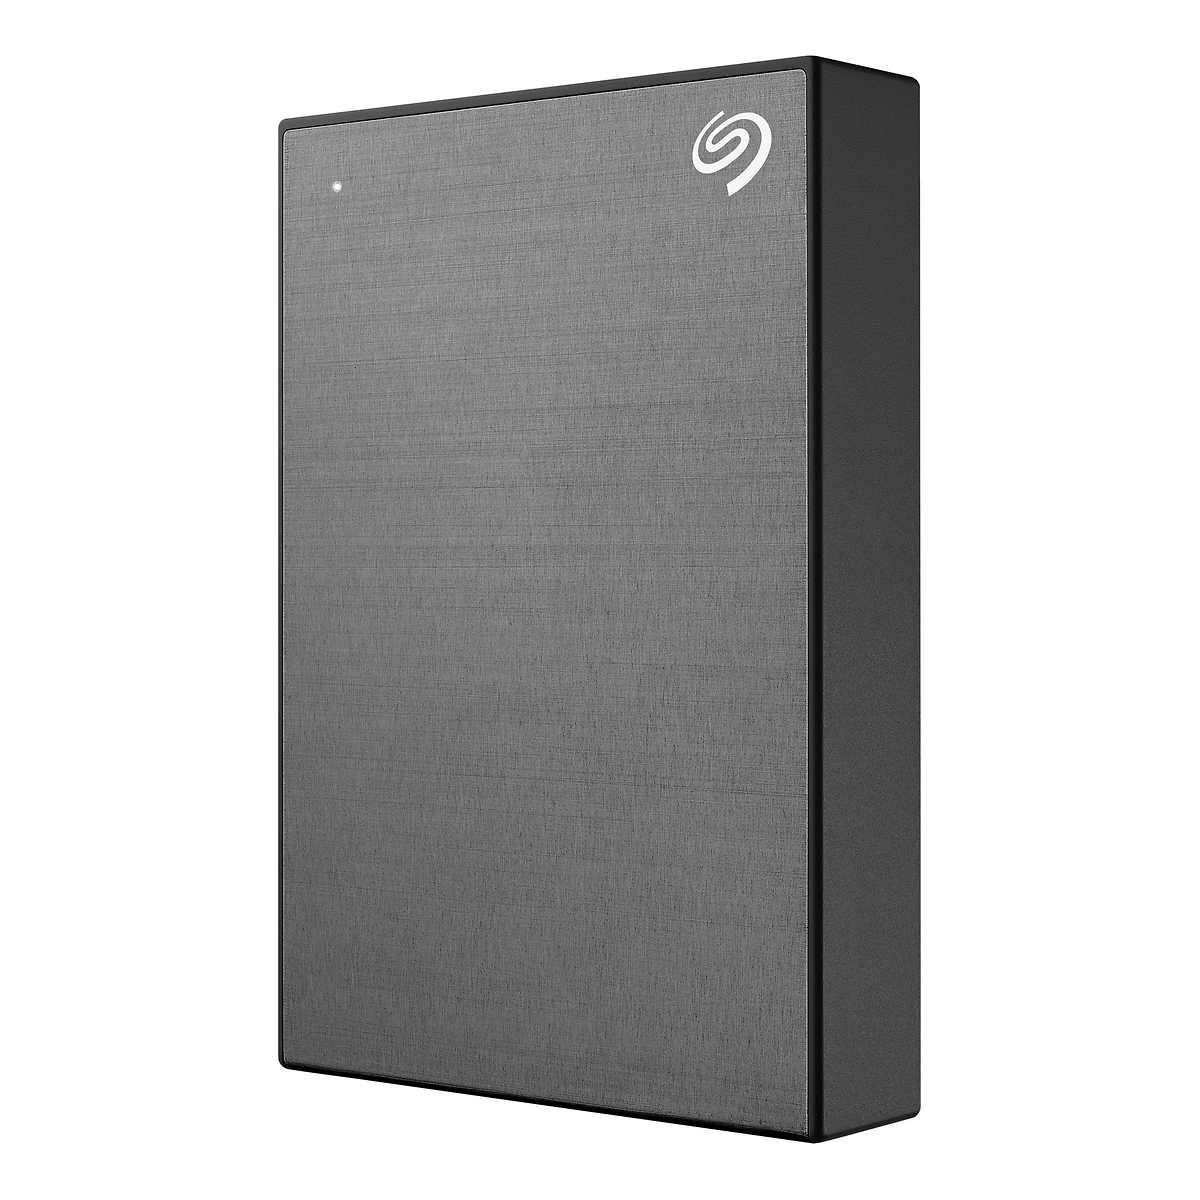 5TB Seagate One Touch Portable Hard Drive for $89.99 Shipped